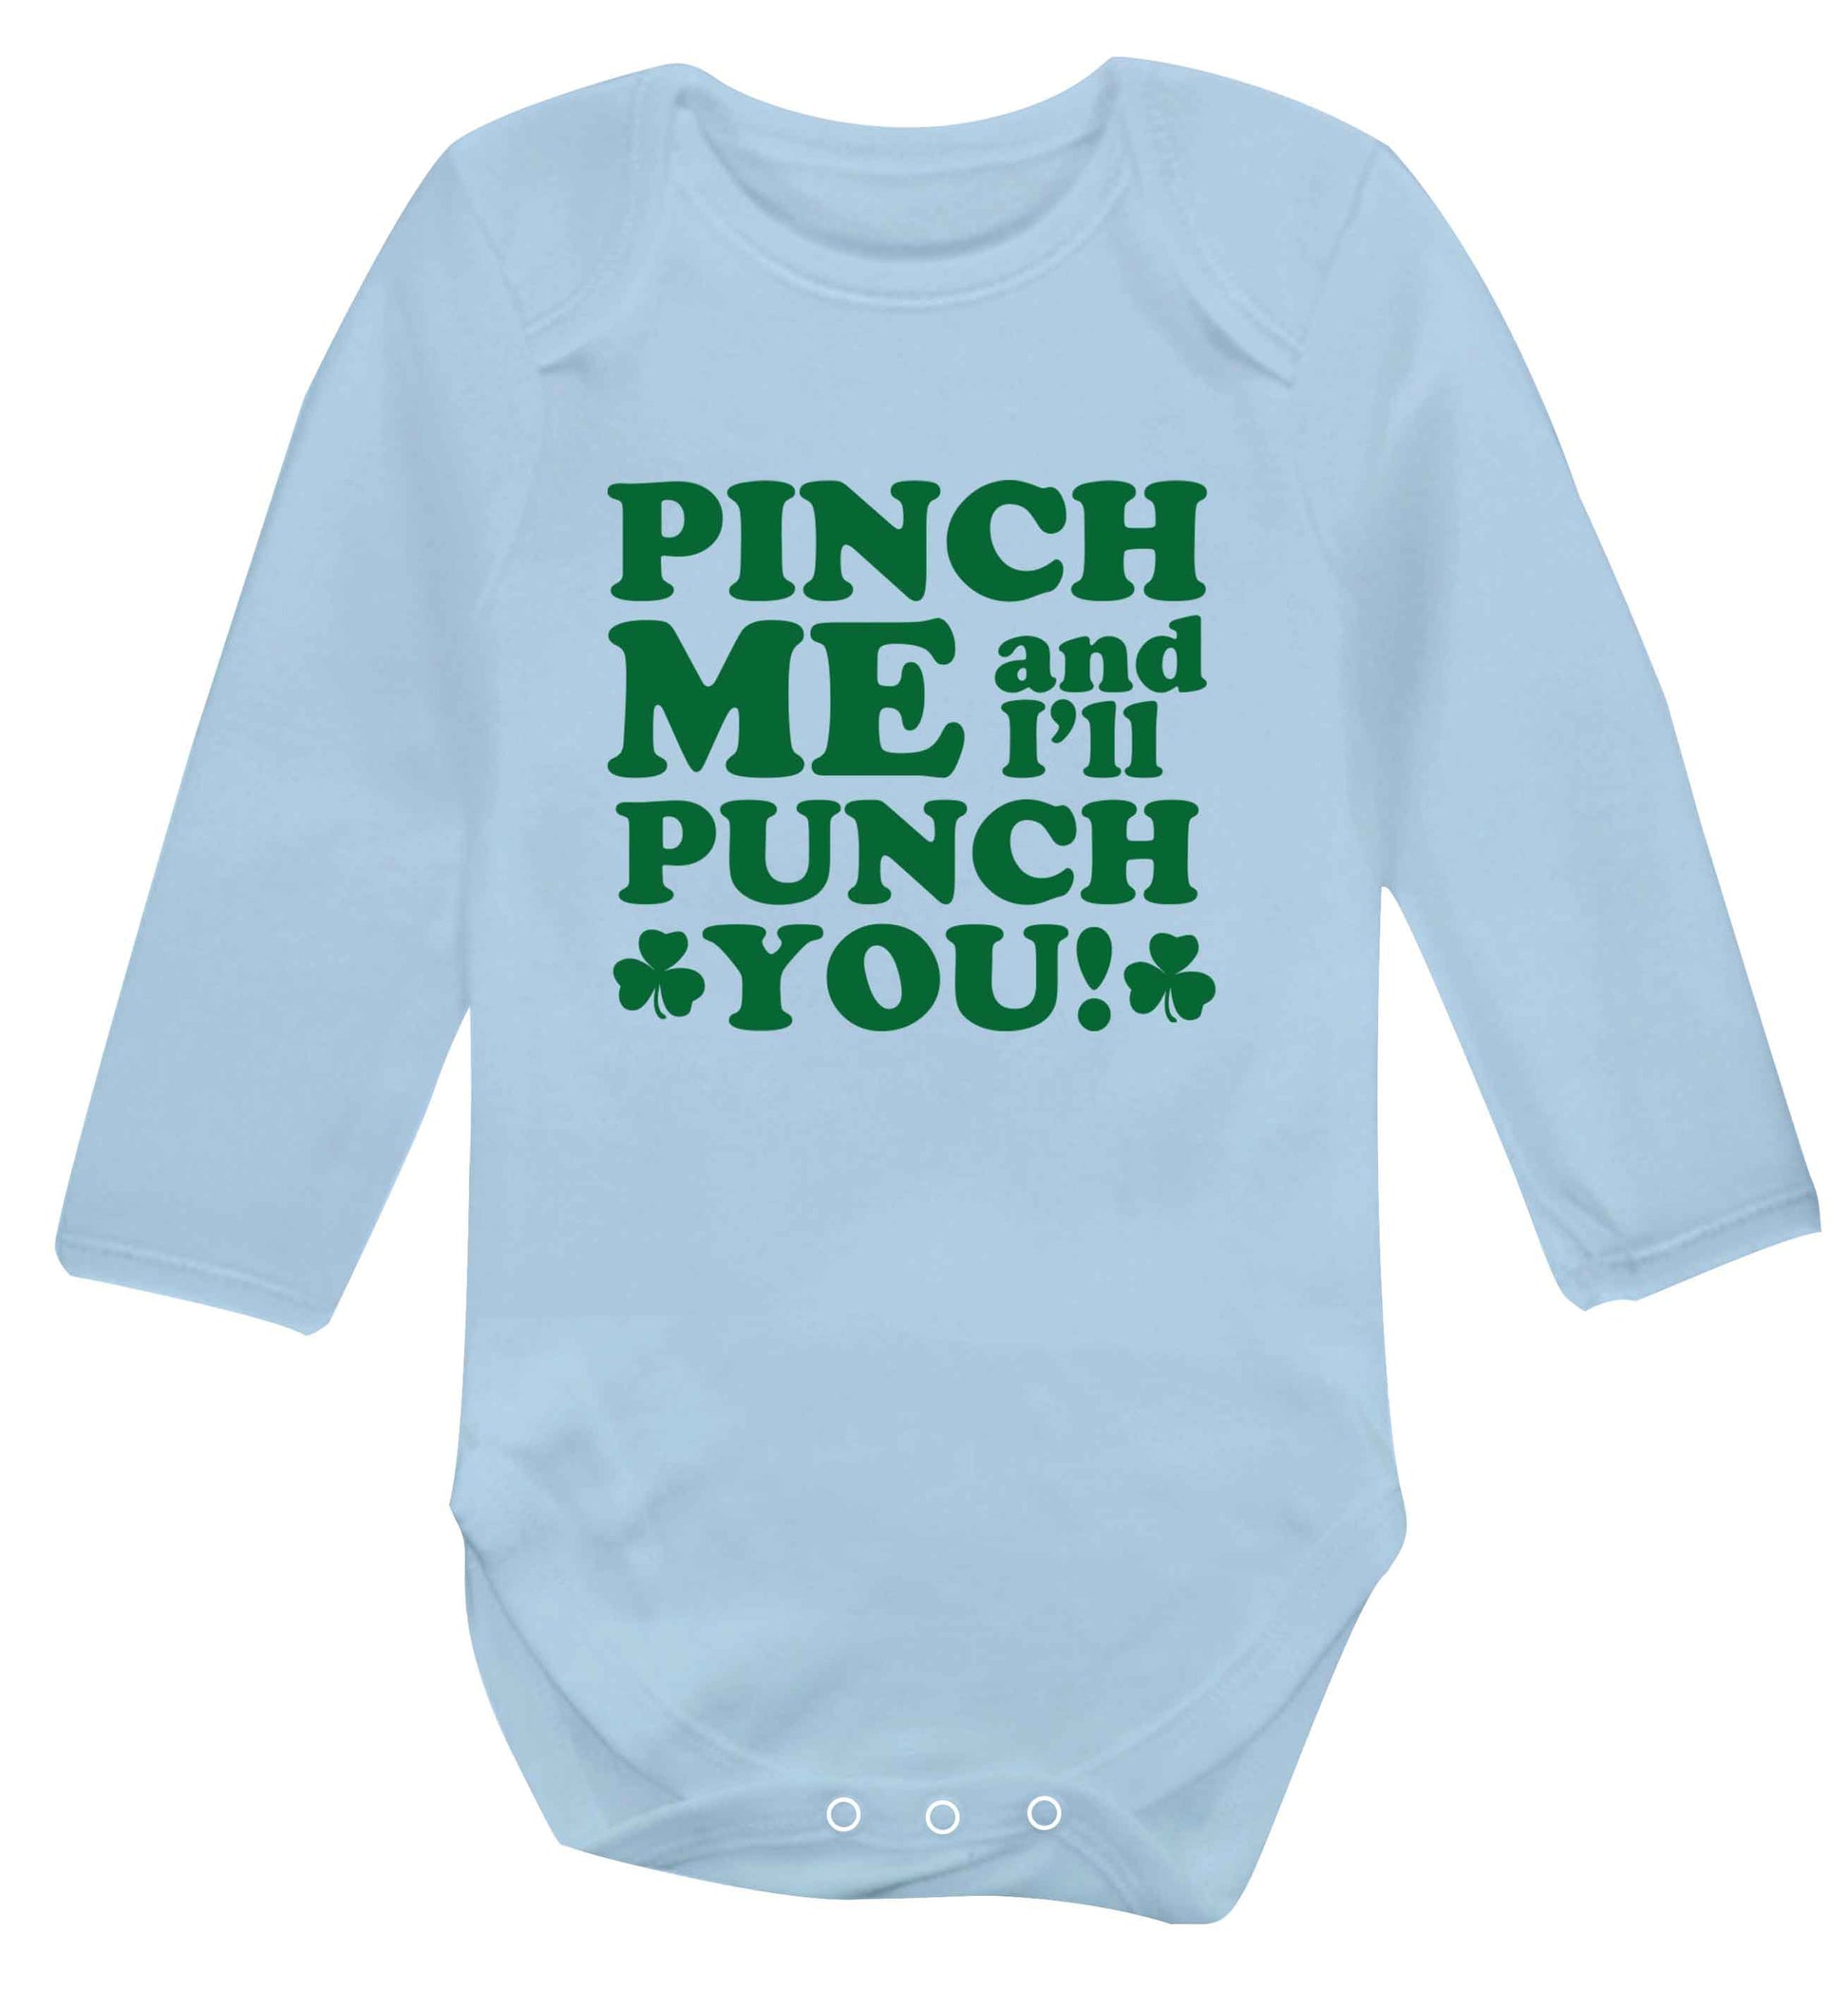 Pinch me and I'll punch you baby vest long sleeved pale blue 6-12 months